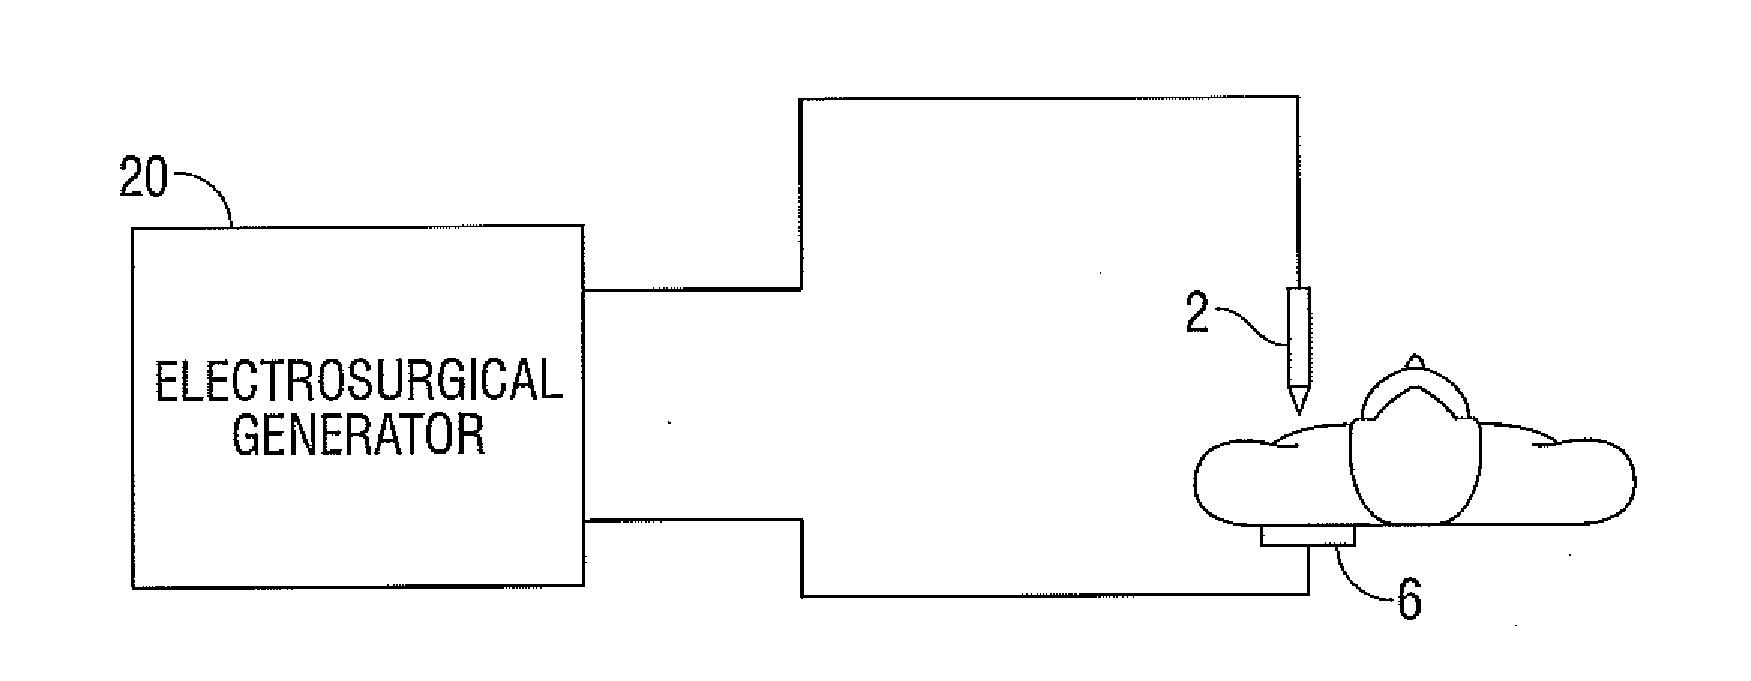 Surgical Device with DC Power Connection